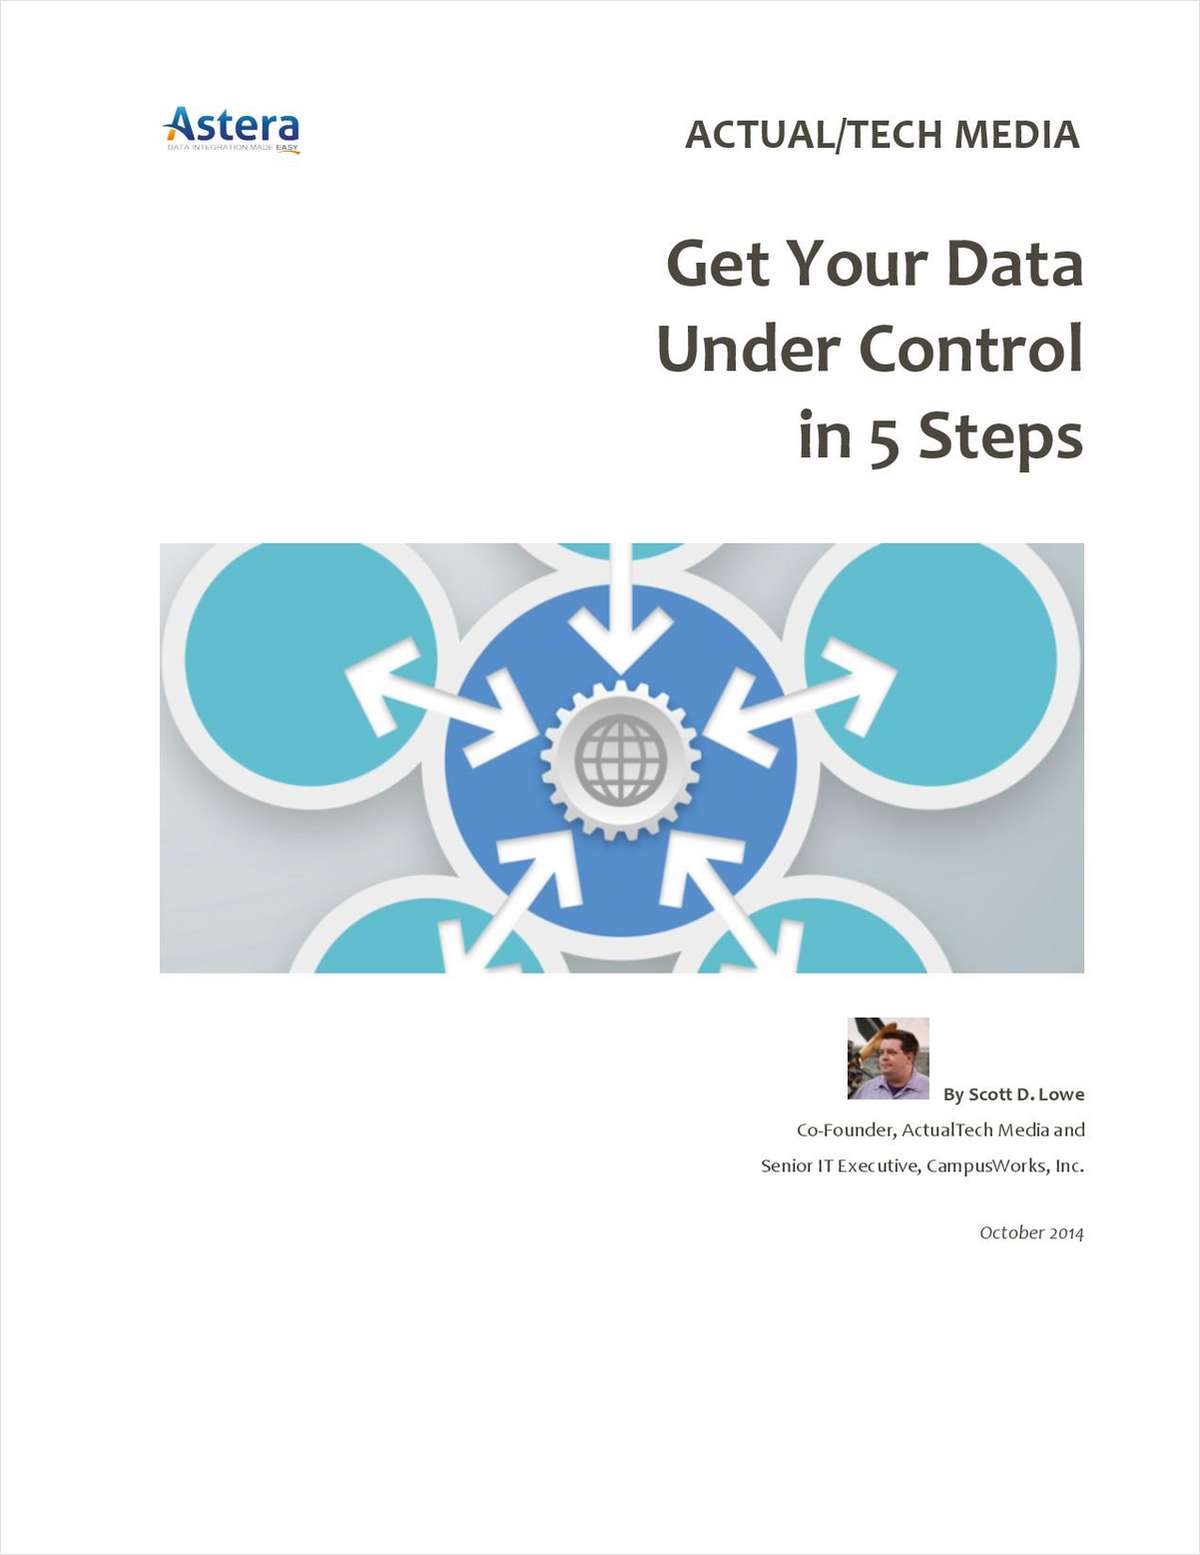 Get Your Data Under Control in 5 Steps